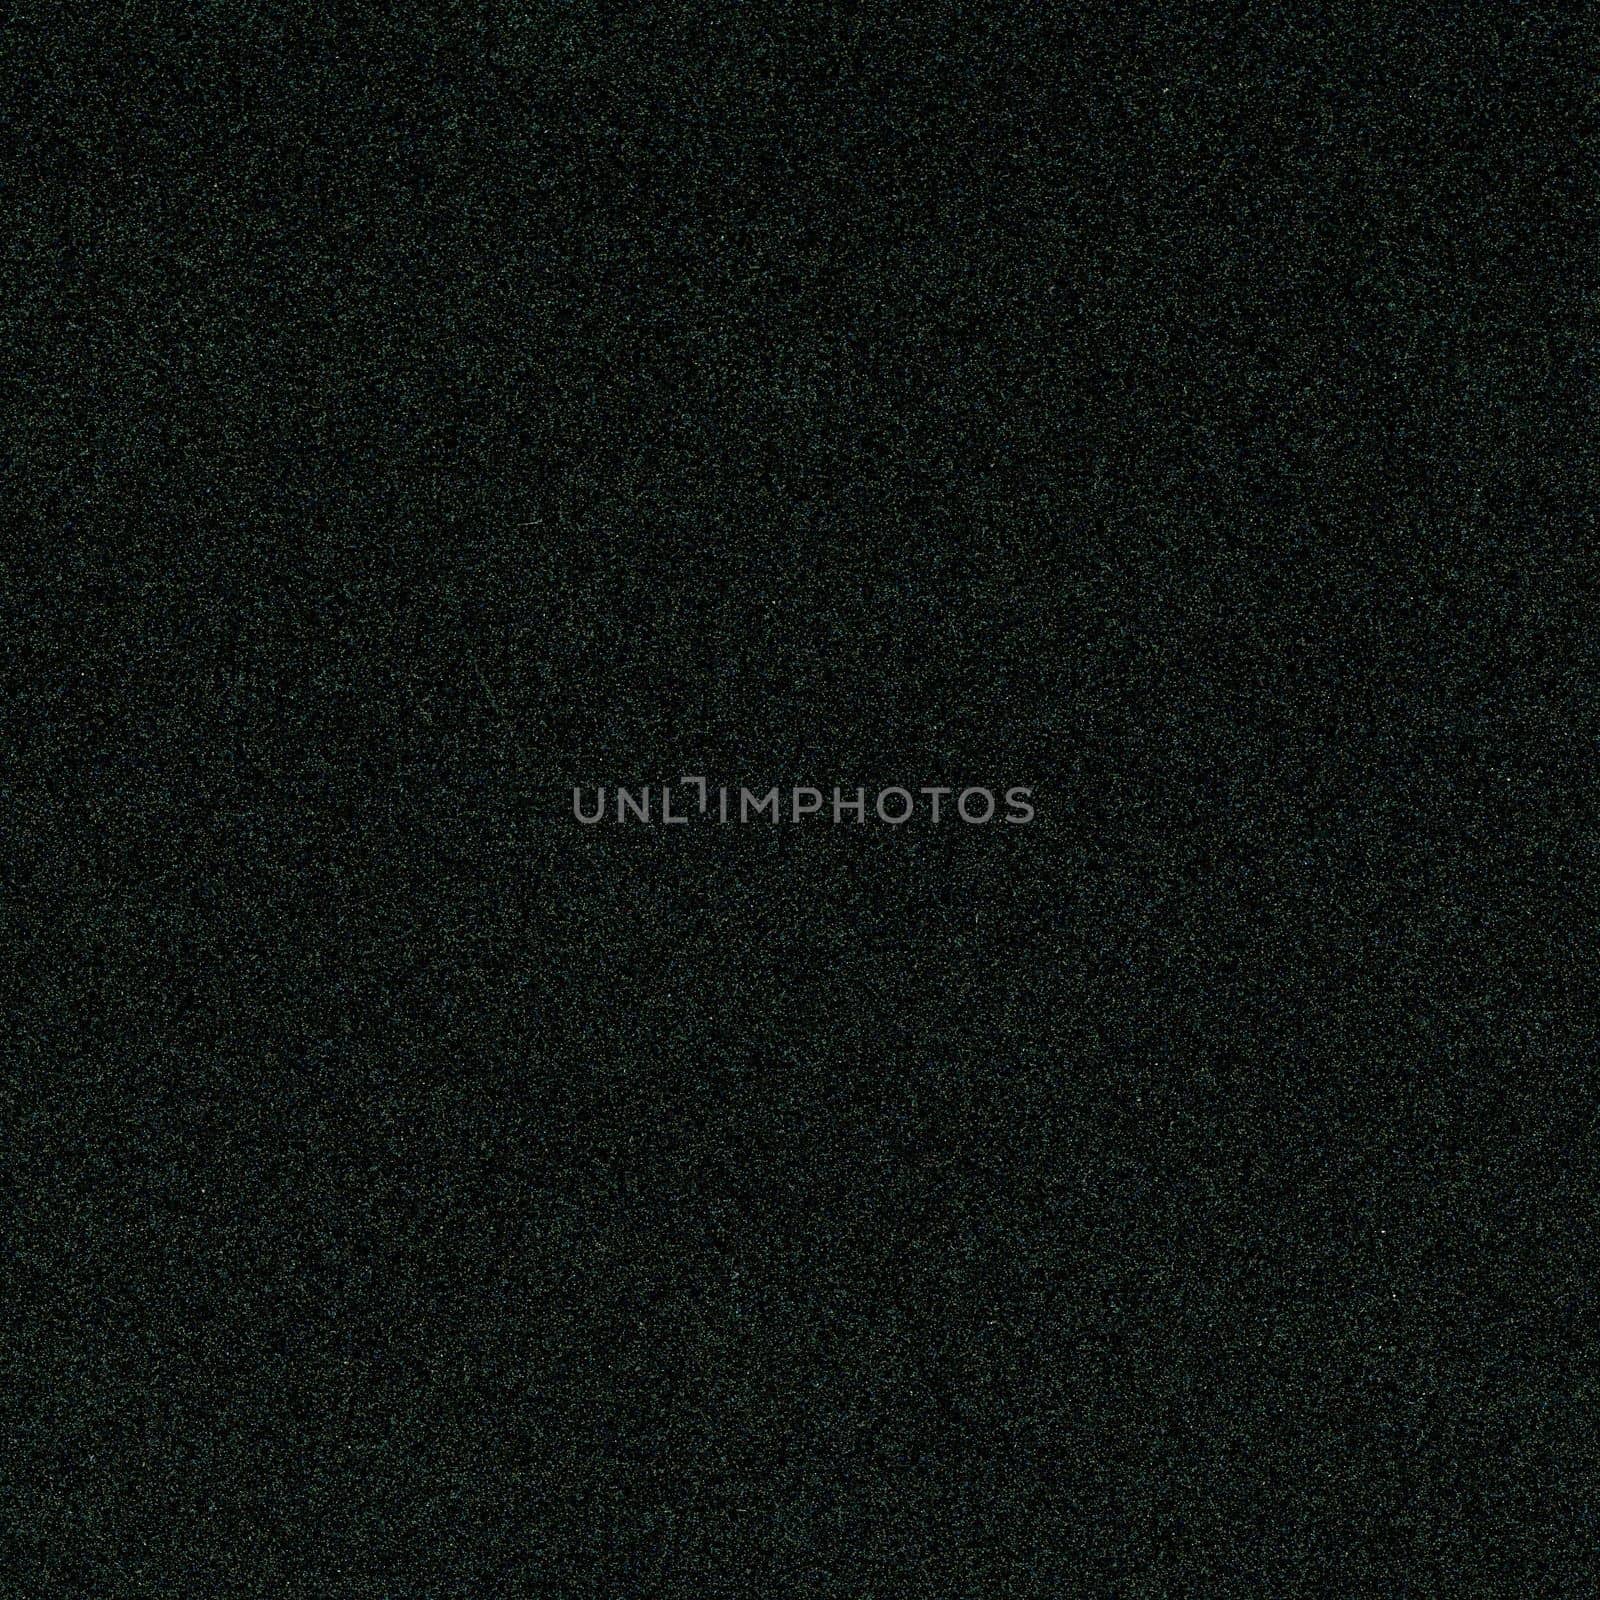 Dark black background texture with shiny speckles of noise